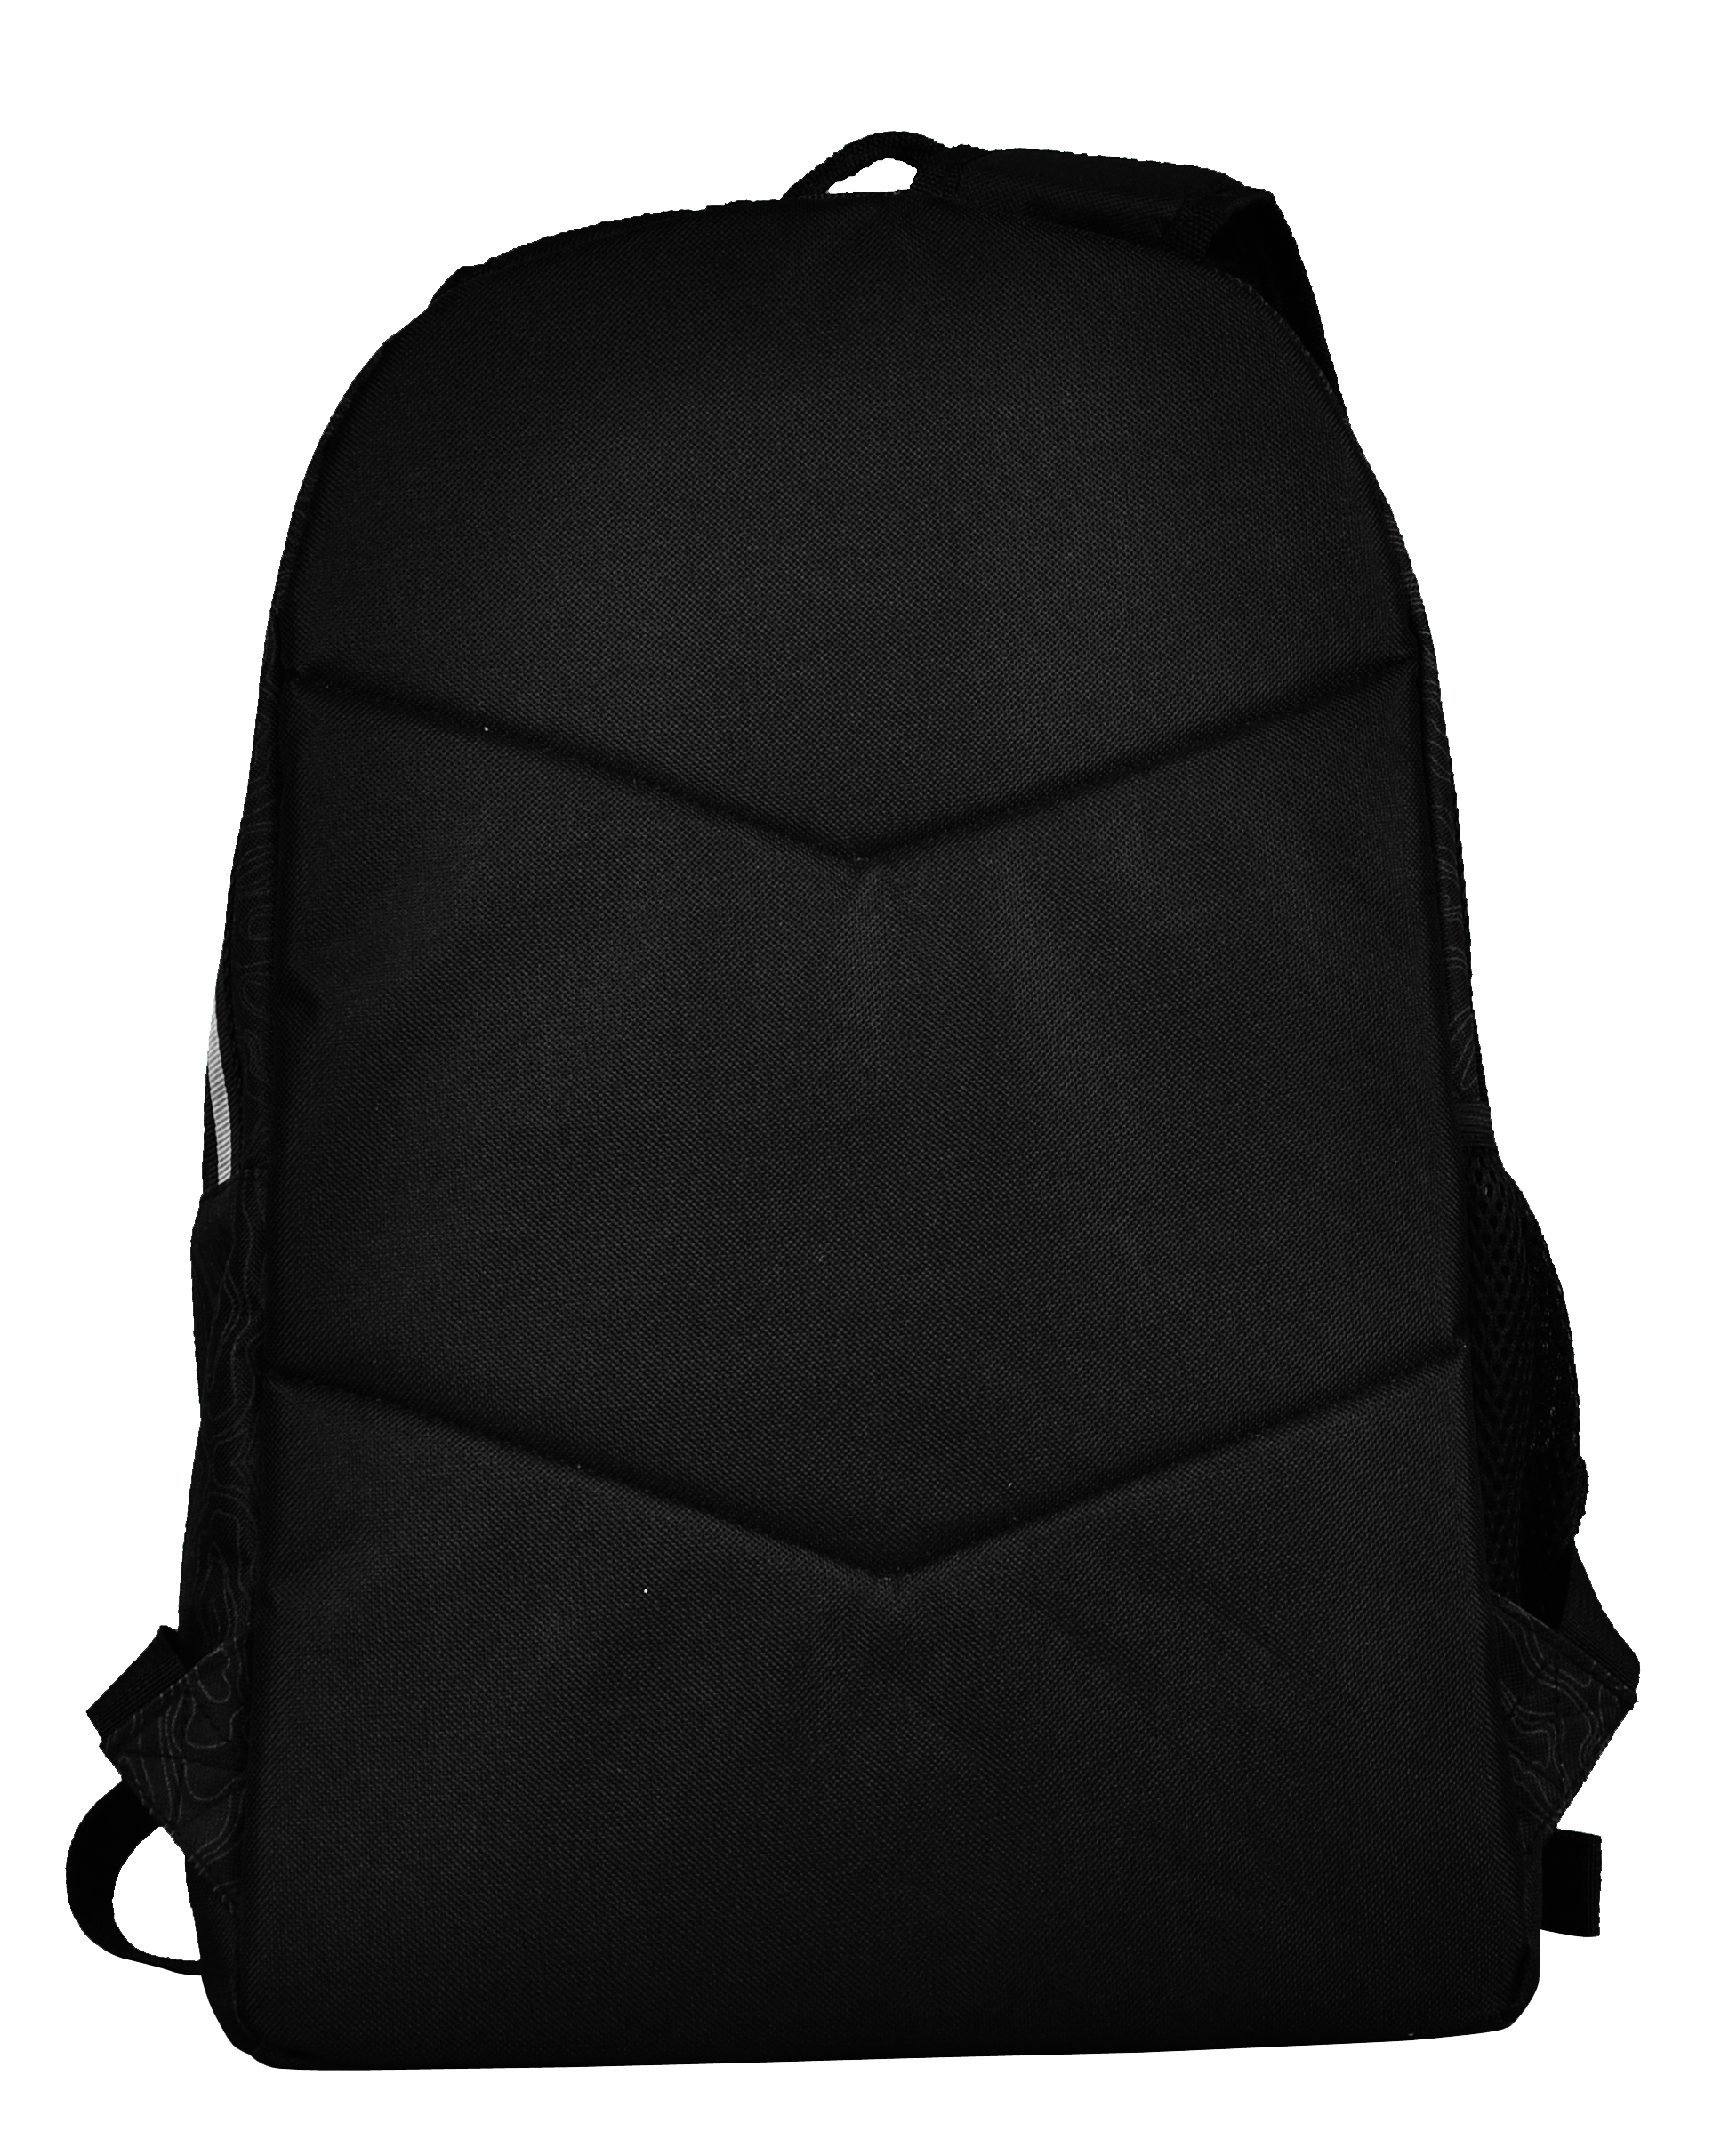 Protégé Black Sports Backpack with Adujstable Straps - image 2 of 5